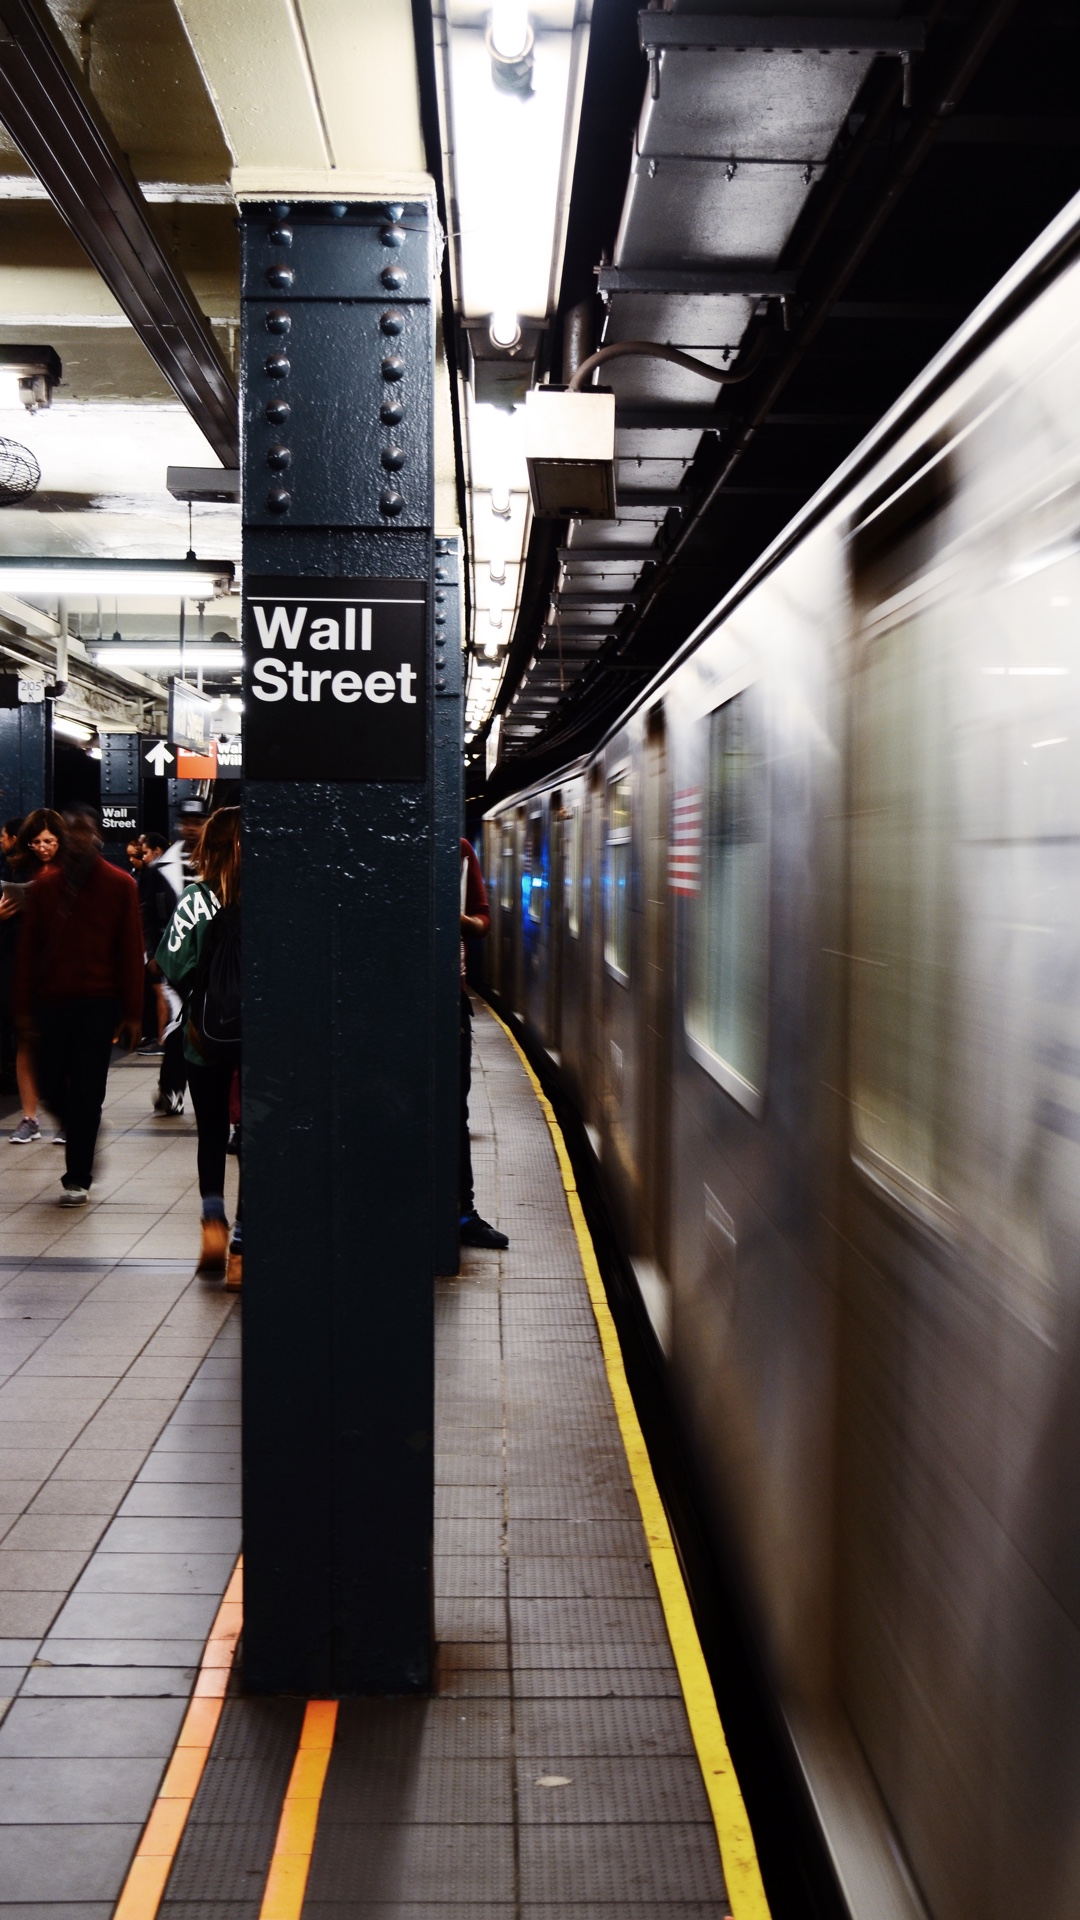 New York, New York For Ios Devices And Apple Watch - New York Subway Iphone - HD Wallpaper 